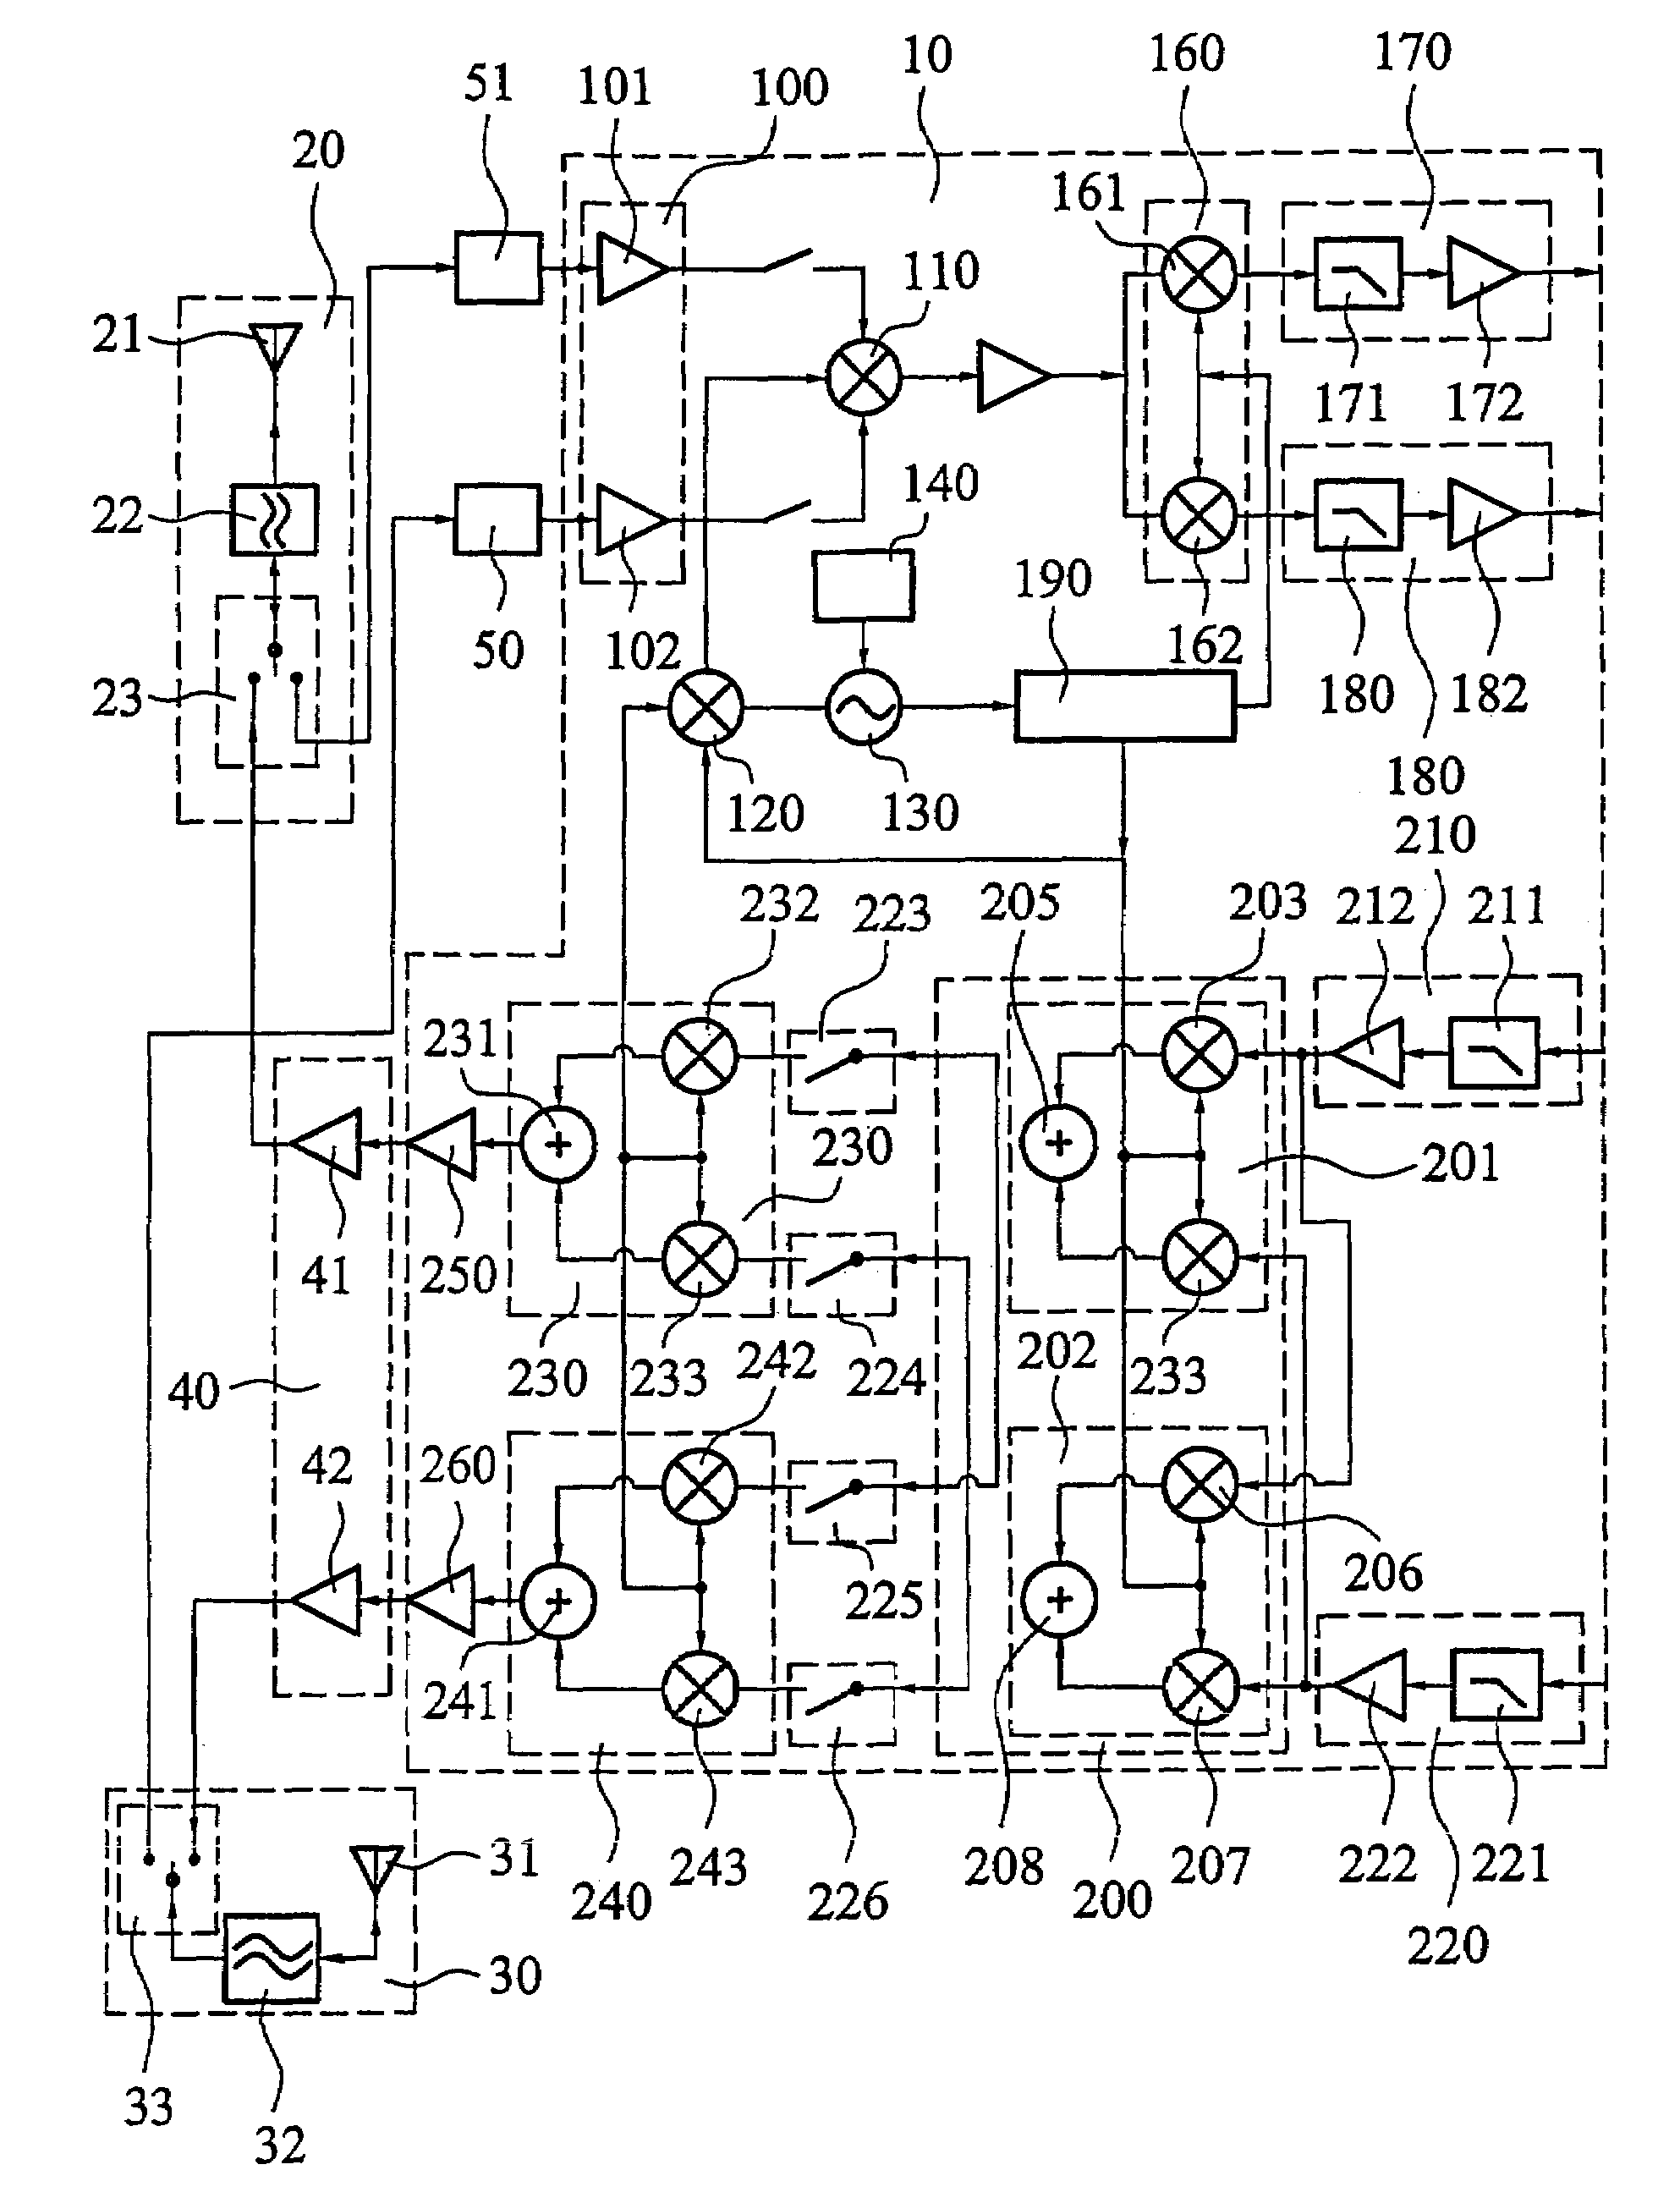 Dual band transceiver architecture for wireless communication